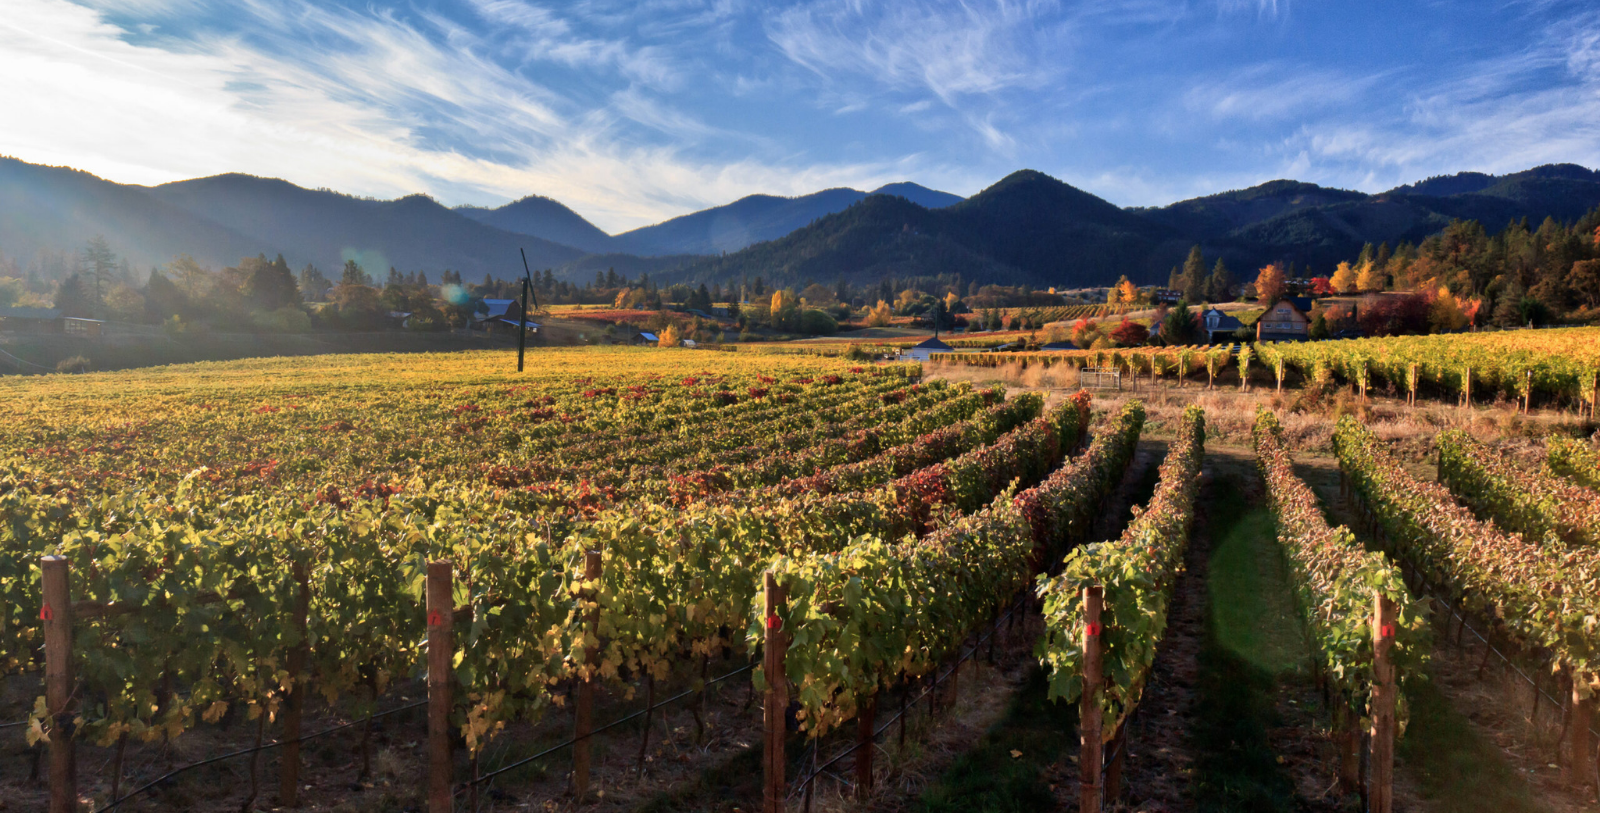 Explore the Rogue River Valley and take in the charm and beauty of this scenic valley.